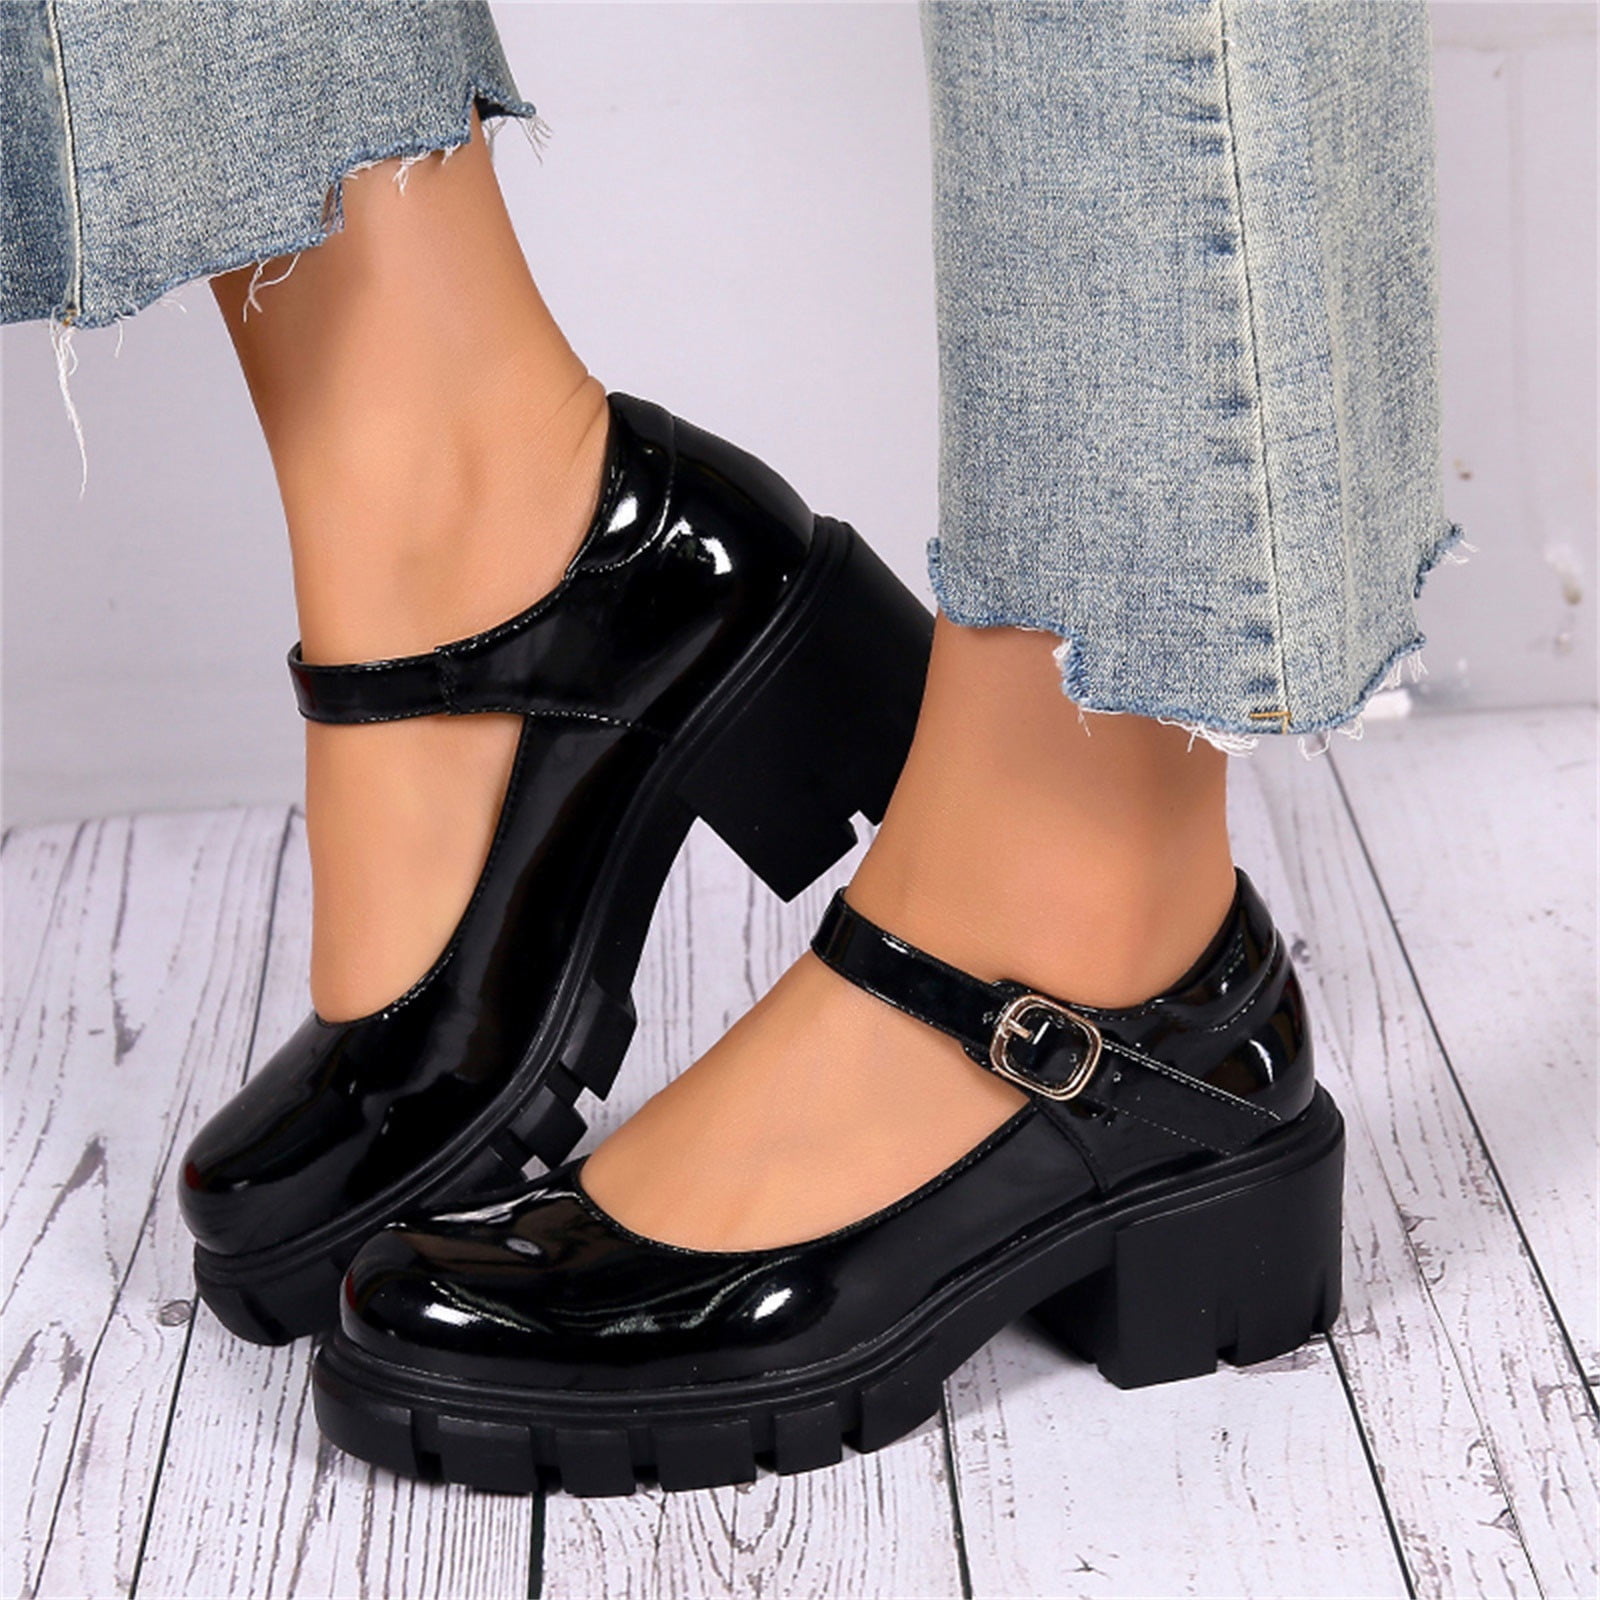 Fashion Mary Jane Shoes Platform High Heels Female Sexy Leather Black White  Women's Heels Round Toe Party Dress Pumps Ladies - Pumps - AliExpress